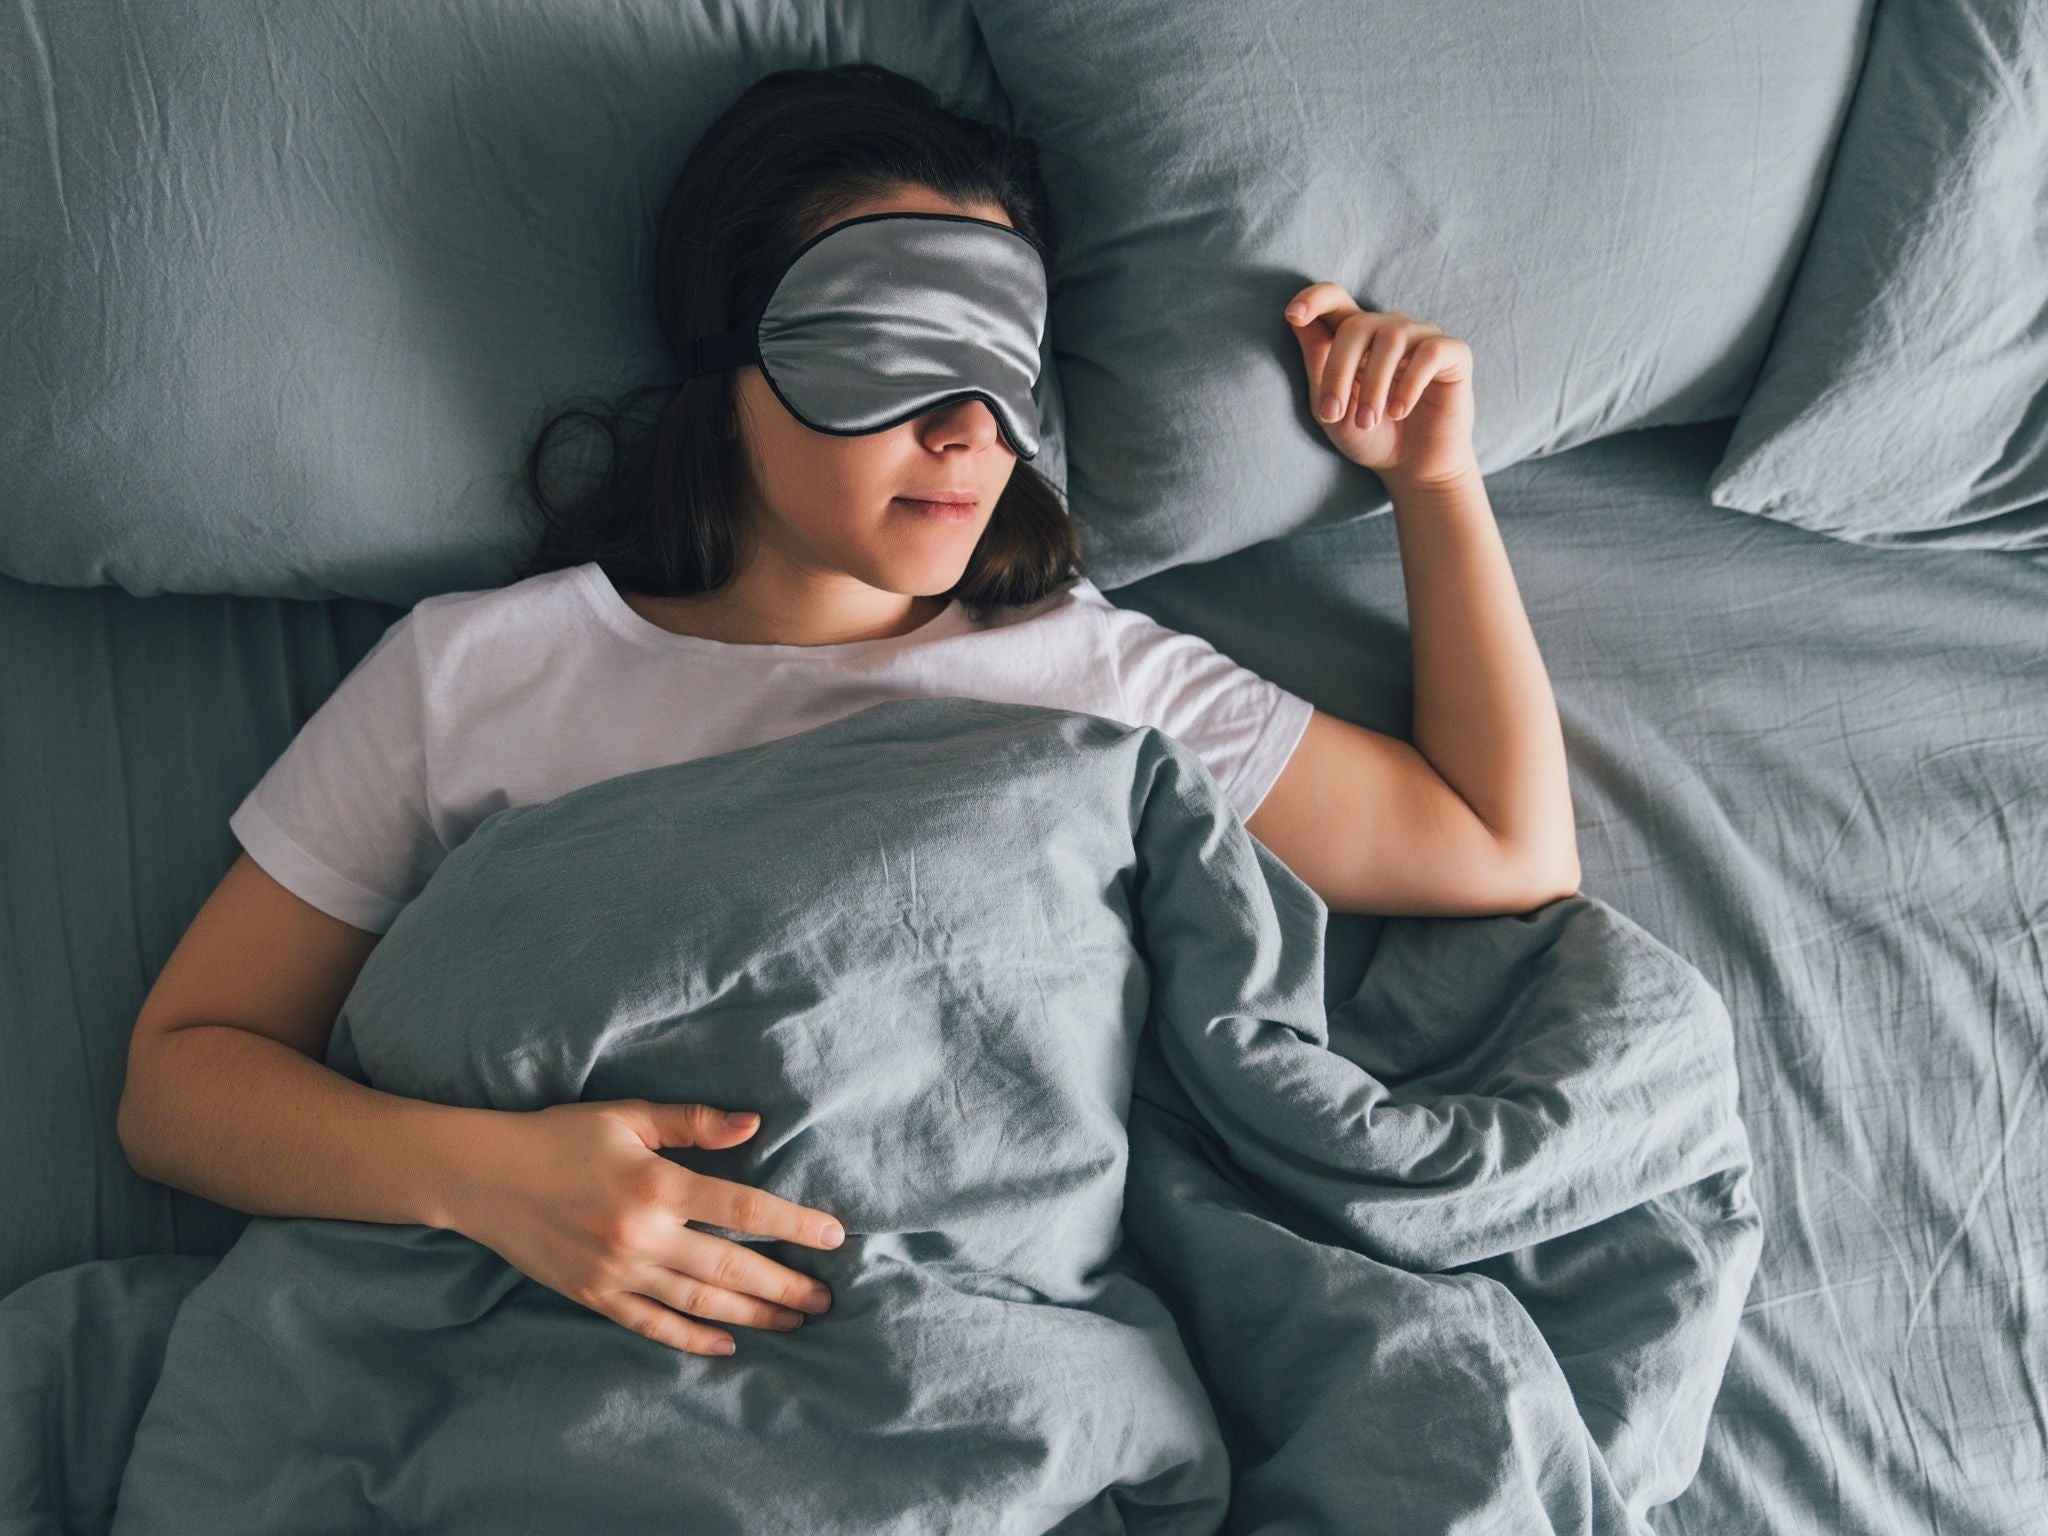 The government is reportedly set to investigate links between sleep and health